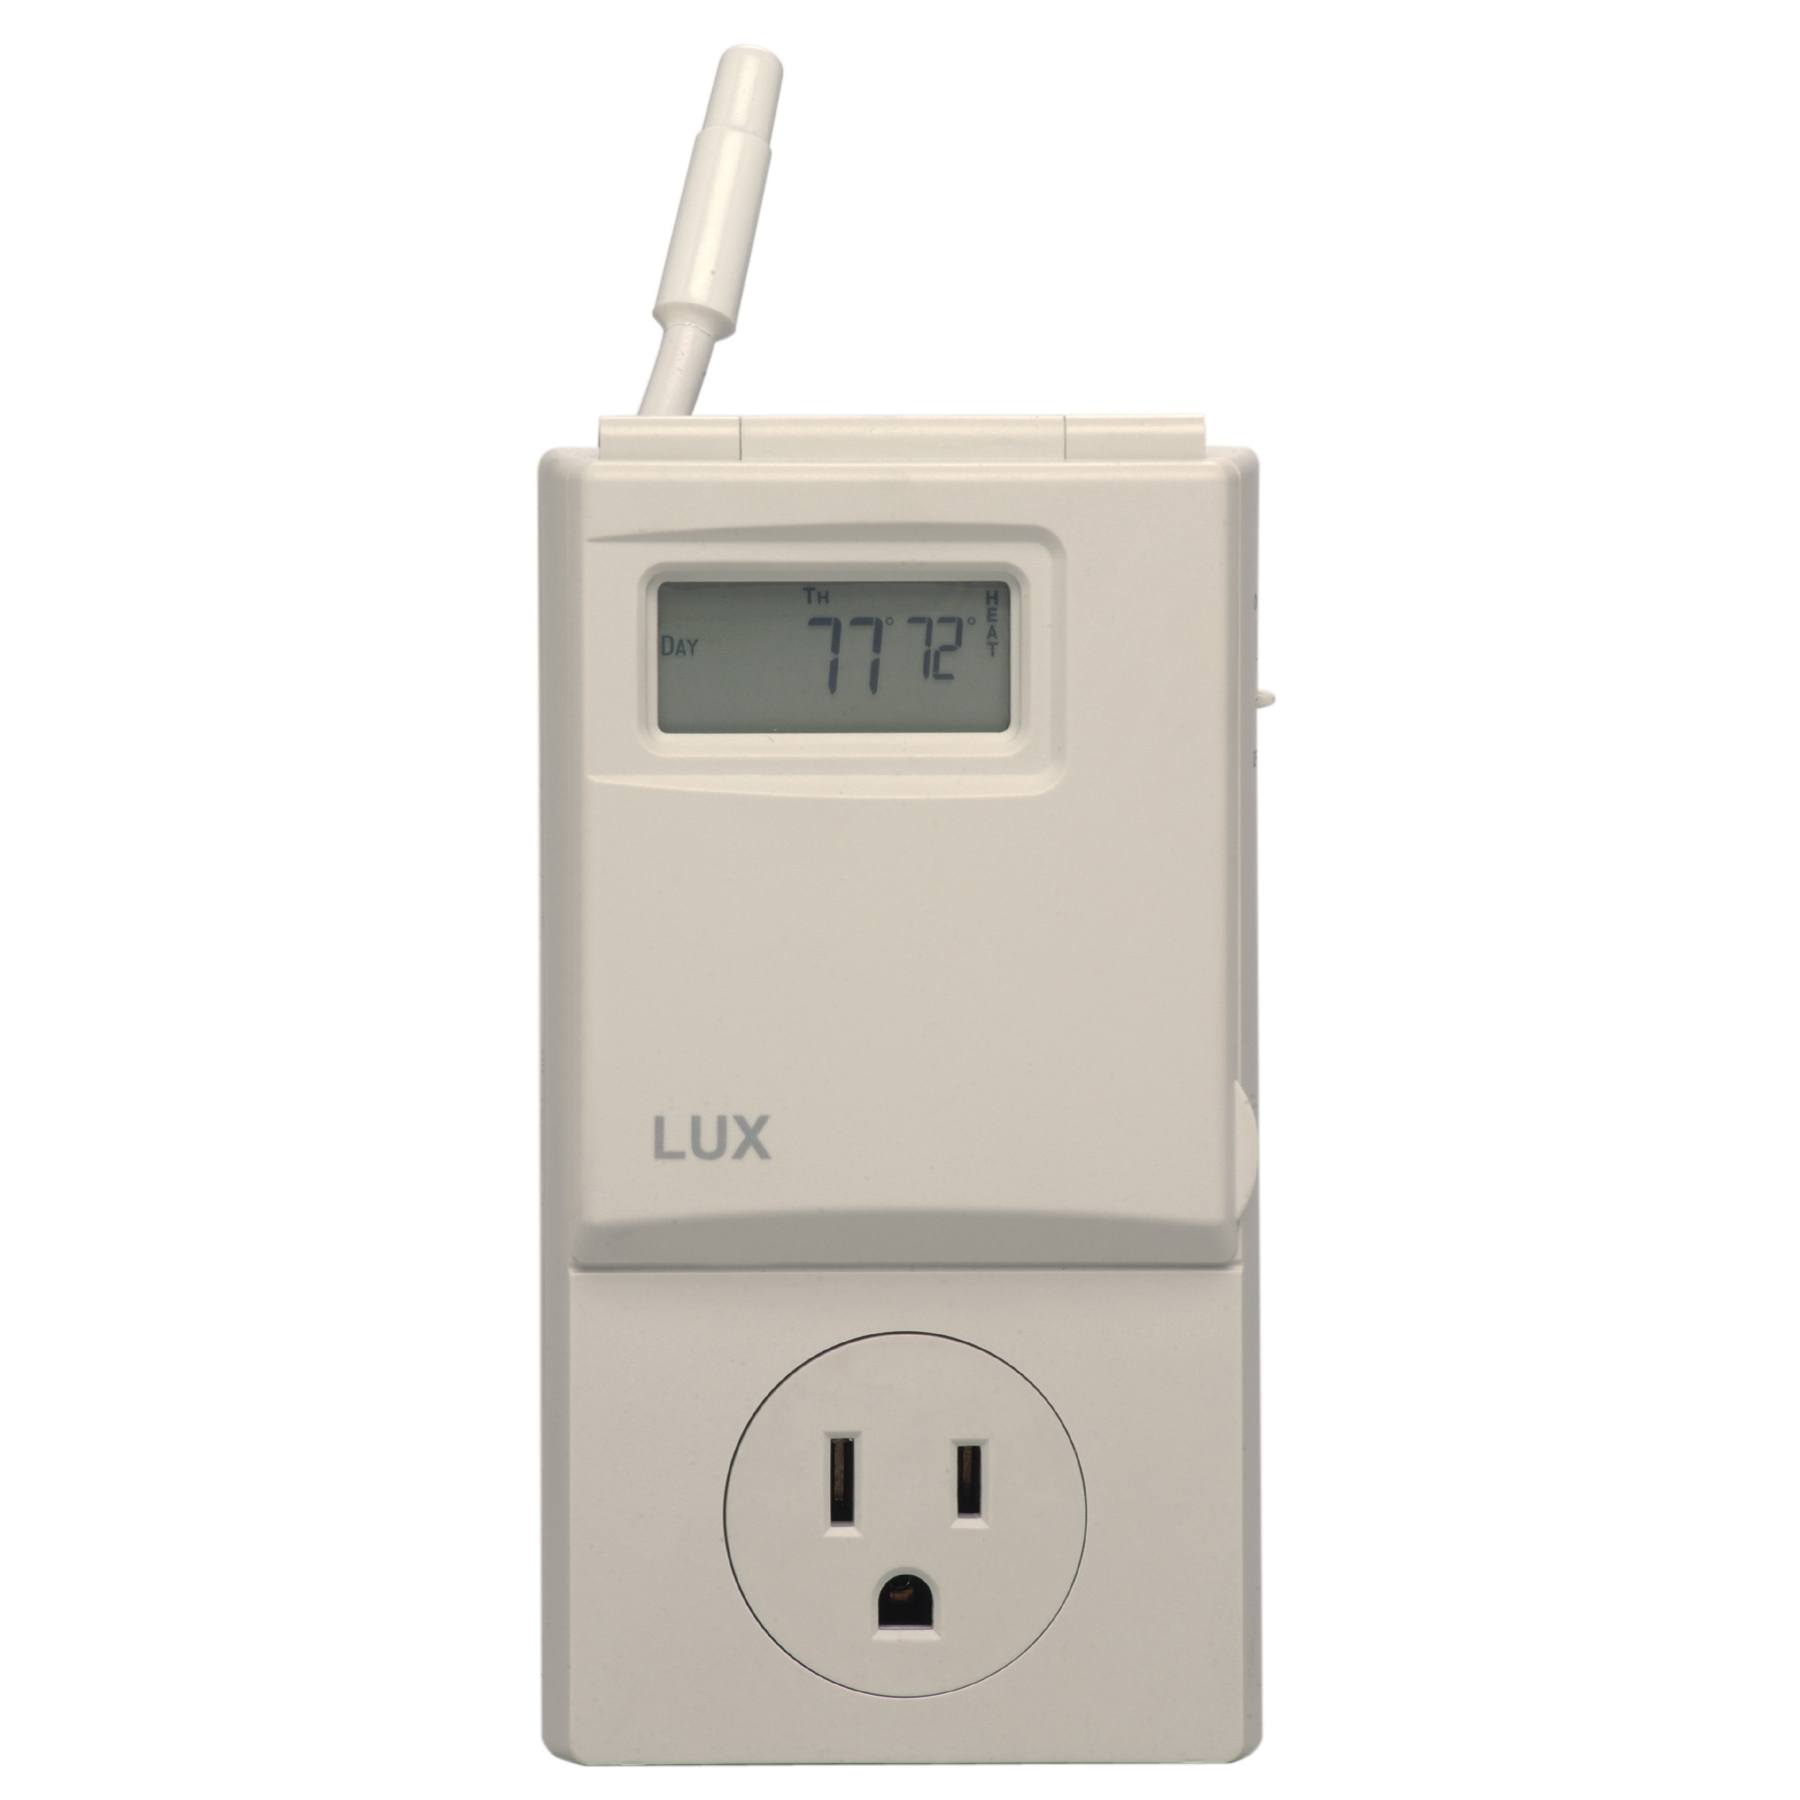 Lux WIN100-A05 Programmable Outlet Thermostat - image 1 of 3